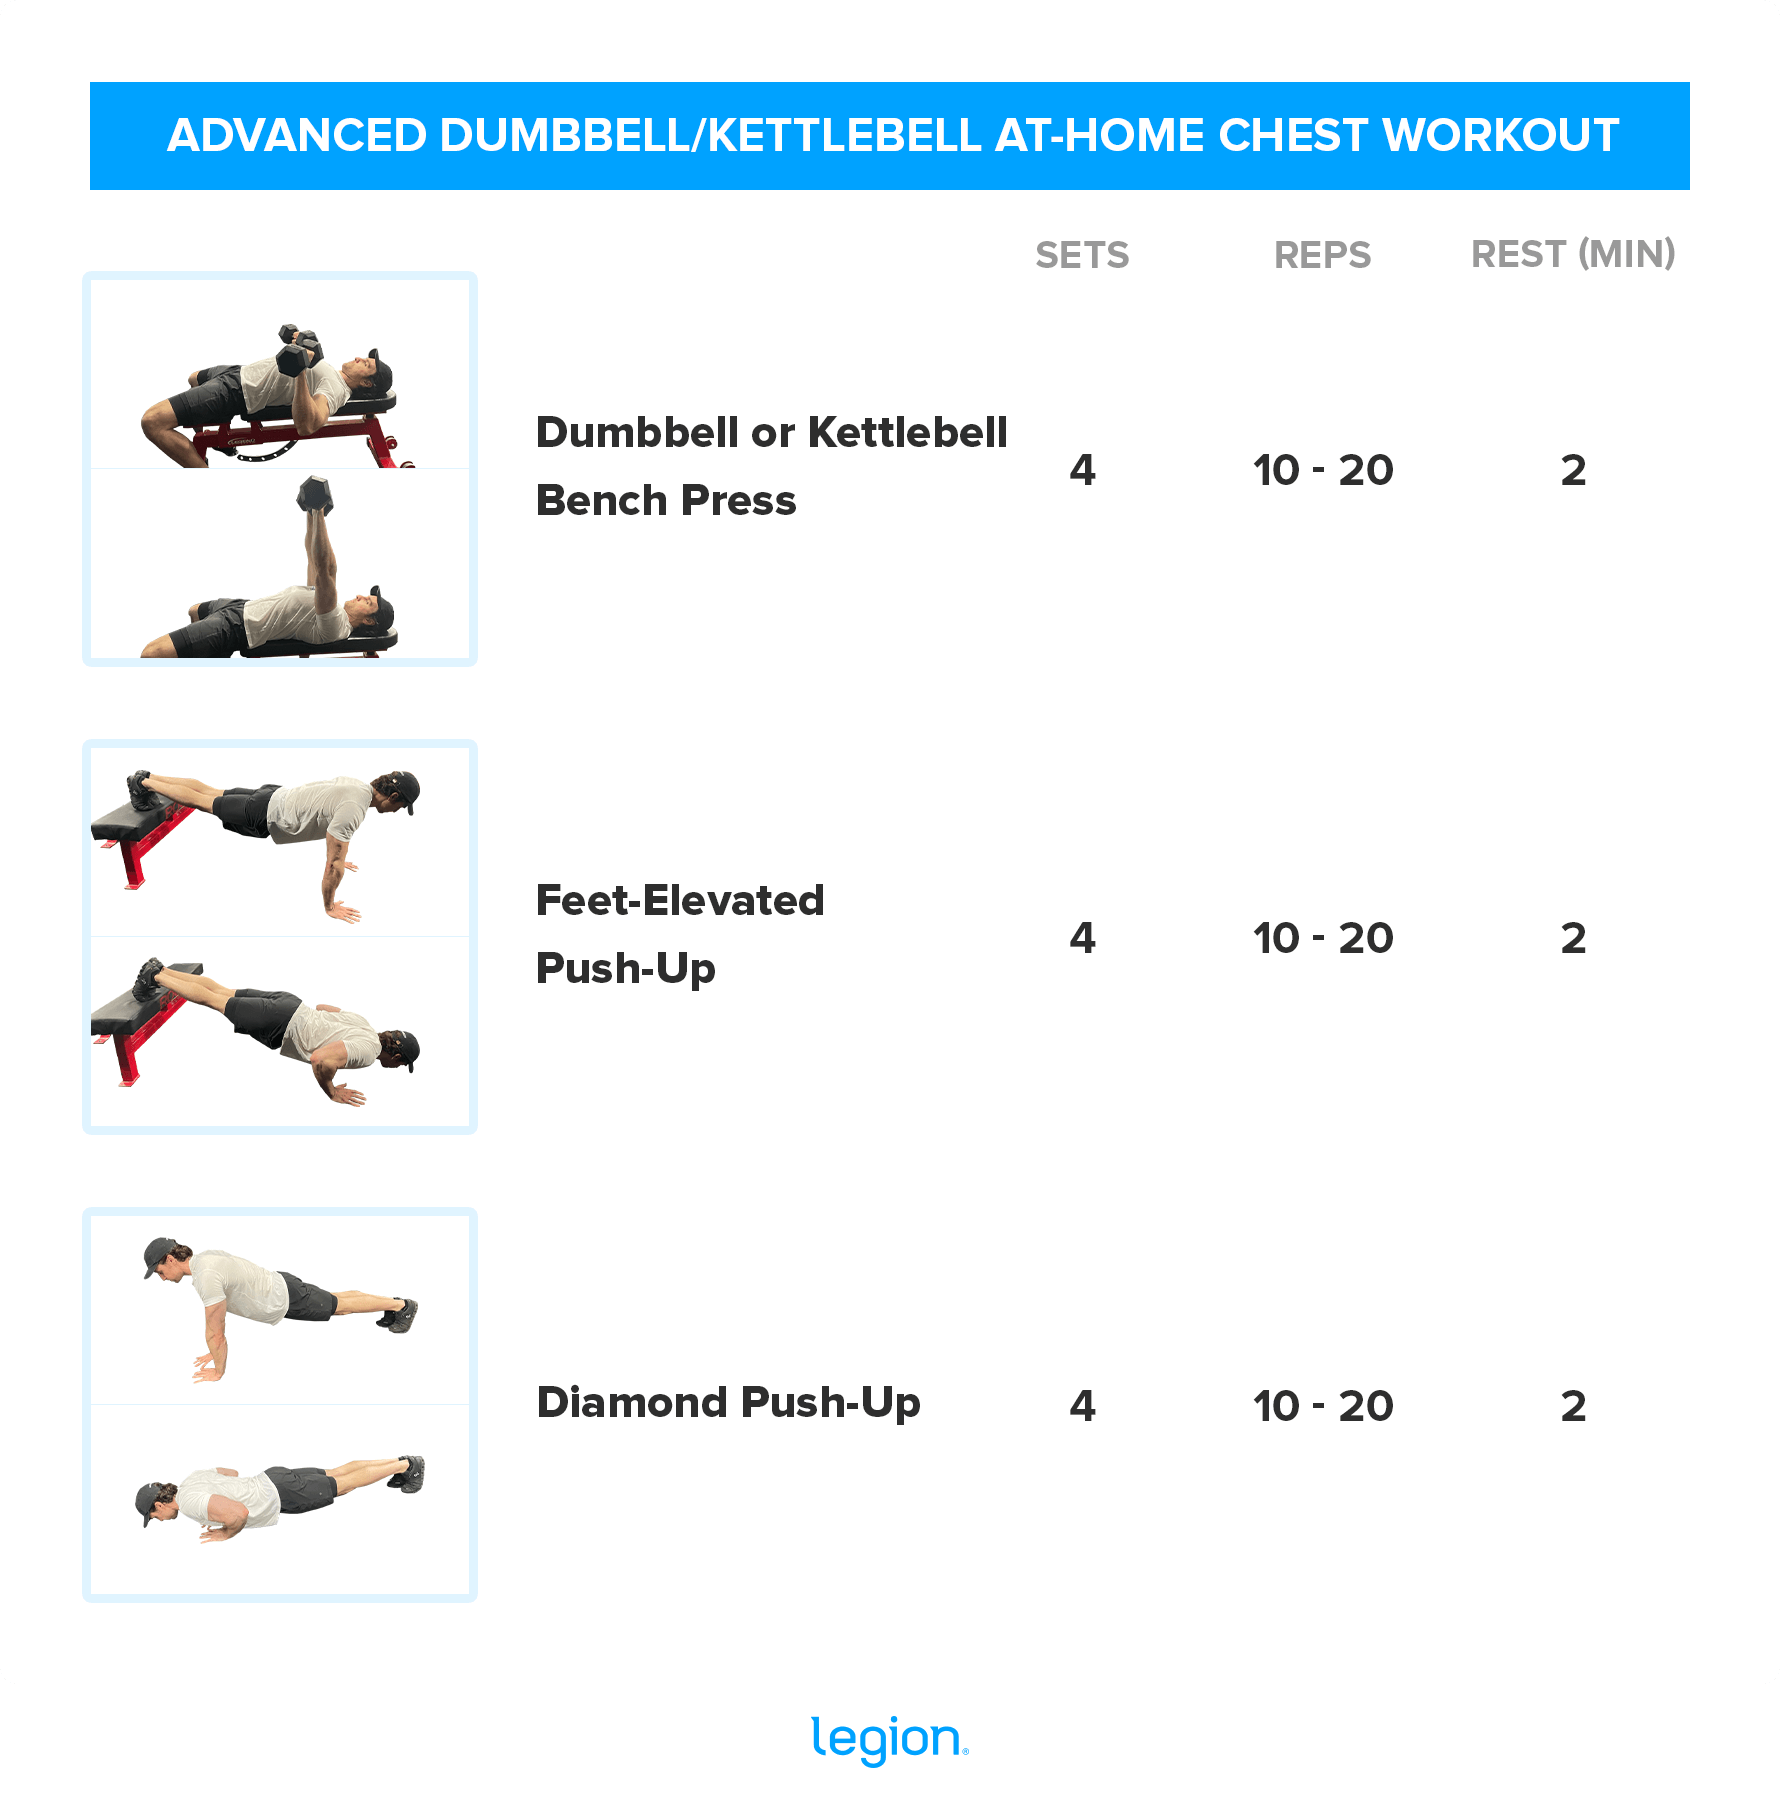 ADVANCED DUMBBELL/KETTLEBELL AT-HOME CHEST WORKOUT 